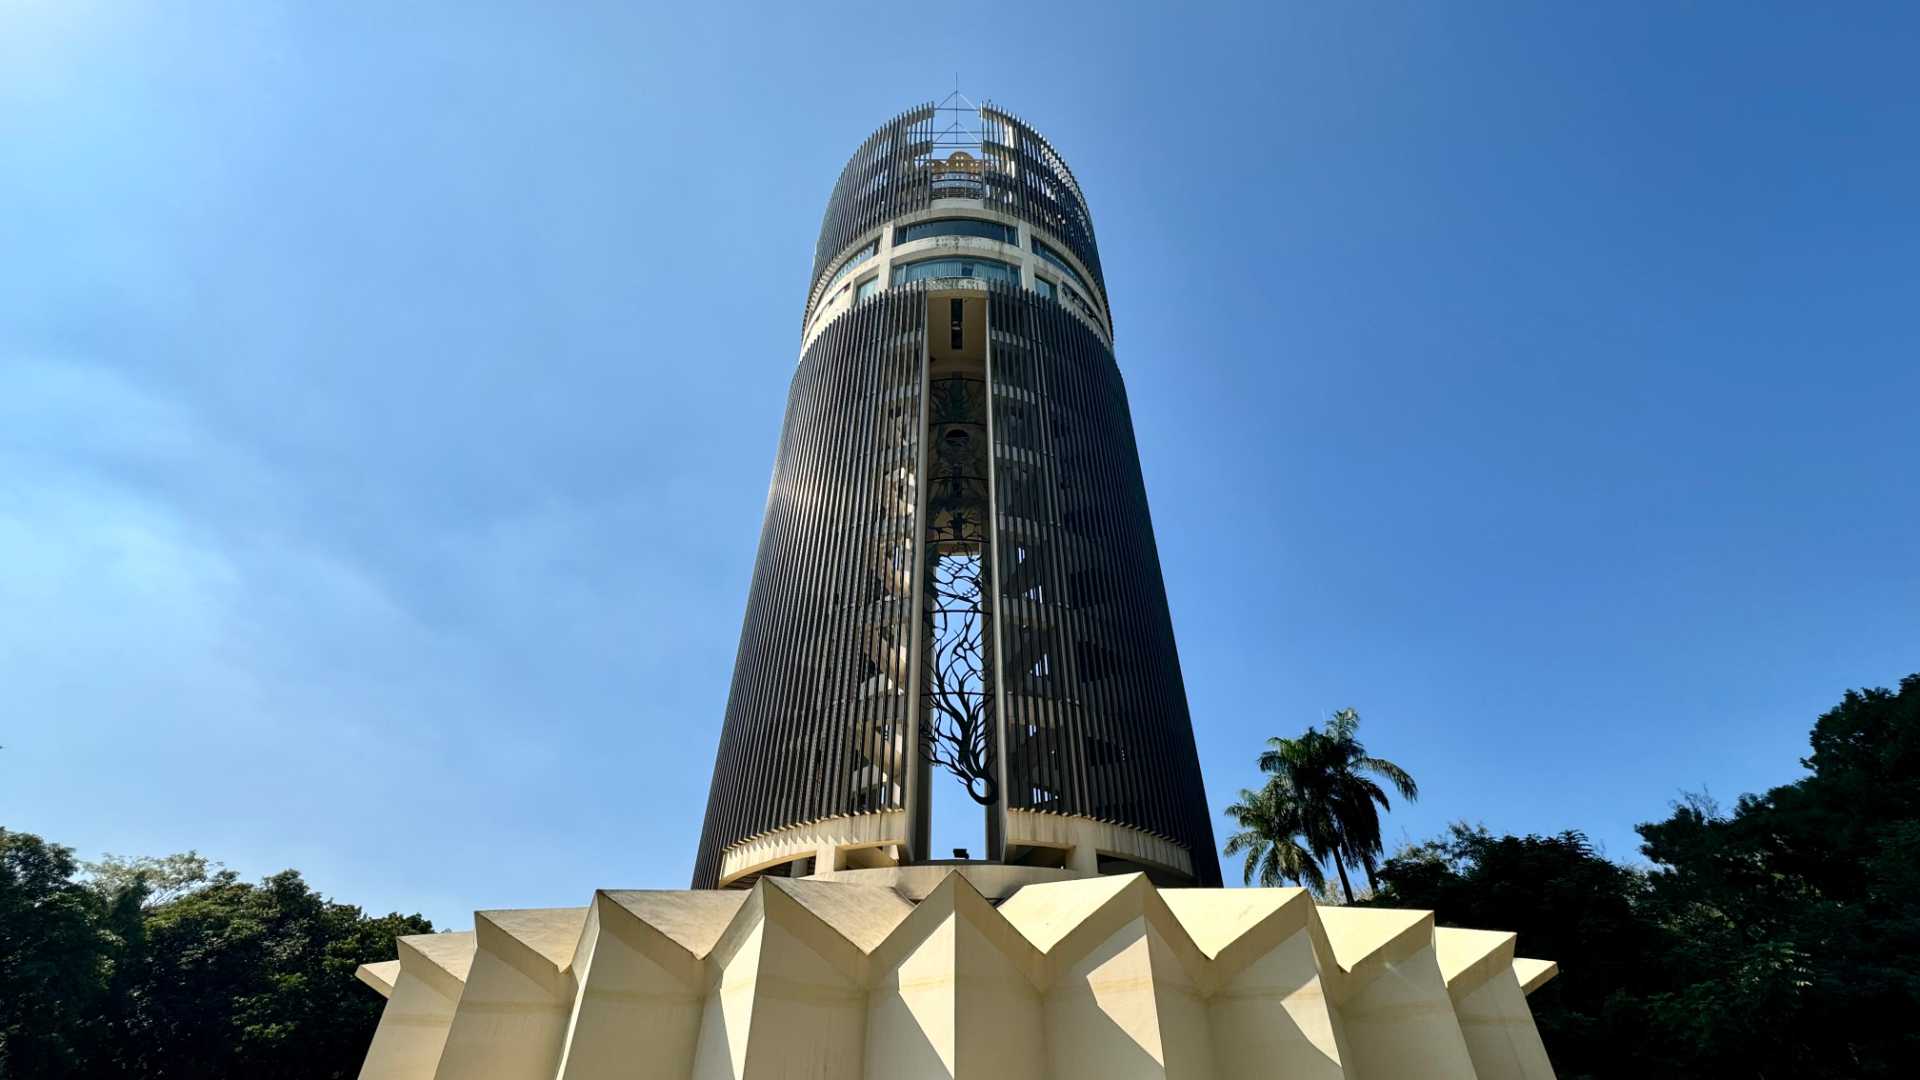 Sun-Shooting Tower in Chiayi. The tower is cylindrical in shape, 12 stories tall, with a sunburst-shaped concrete base.